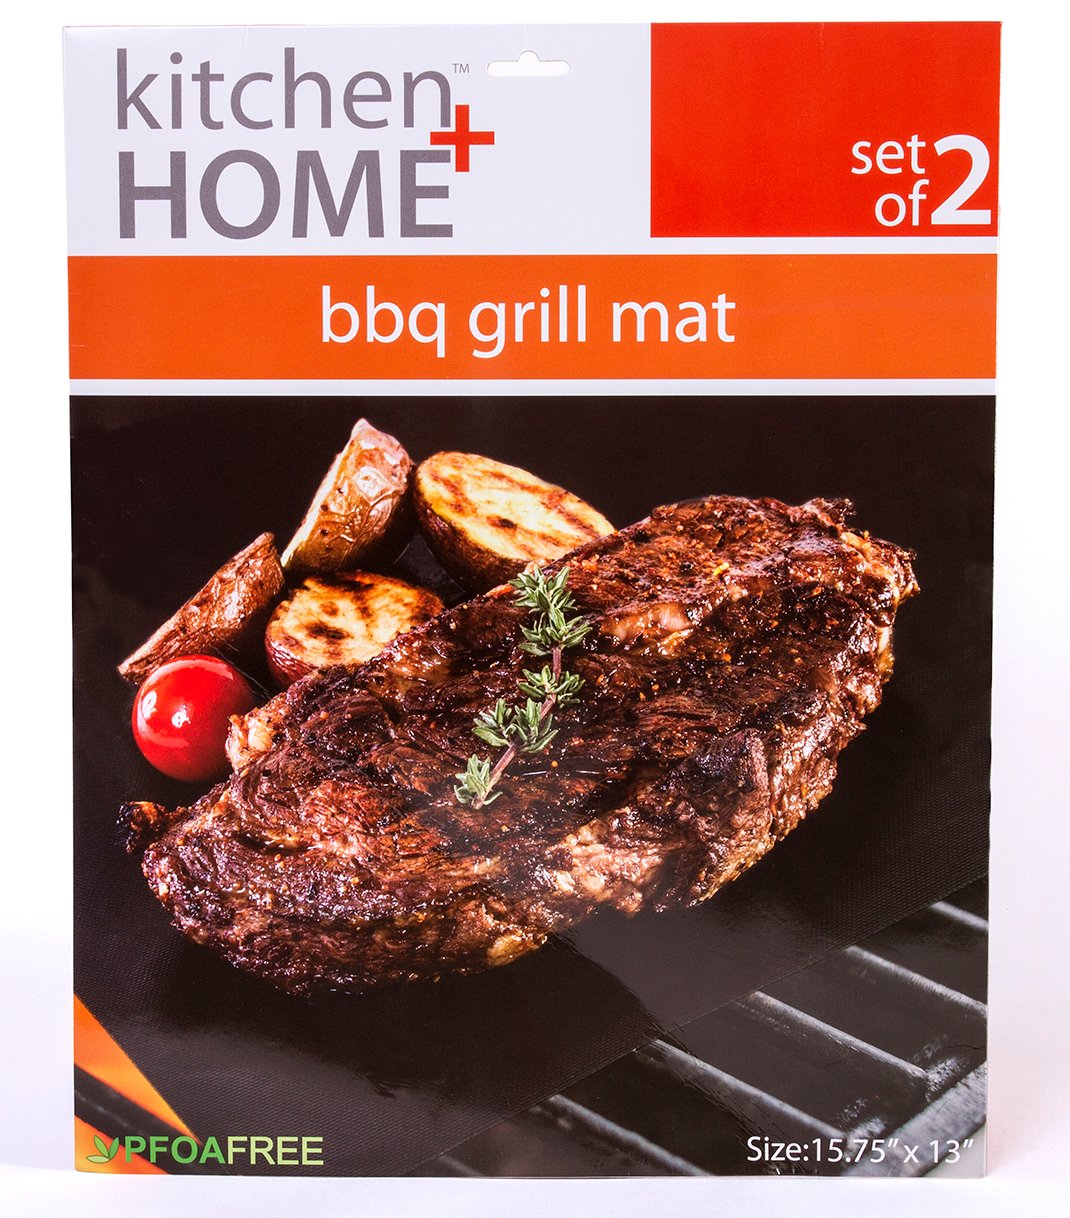 Kitchen + Home 15.75x13-Inch Non-stick, Extra Thick, Reusable BBQ Grill Mats ... - image 1 of 6